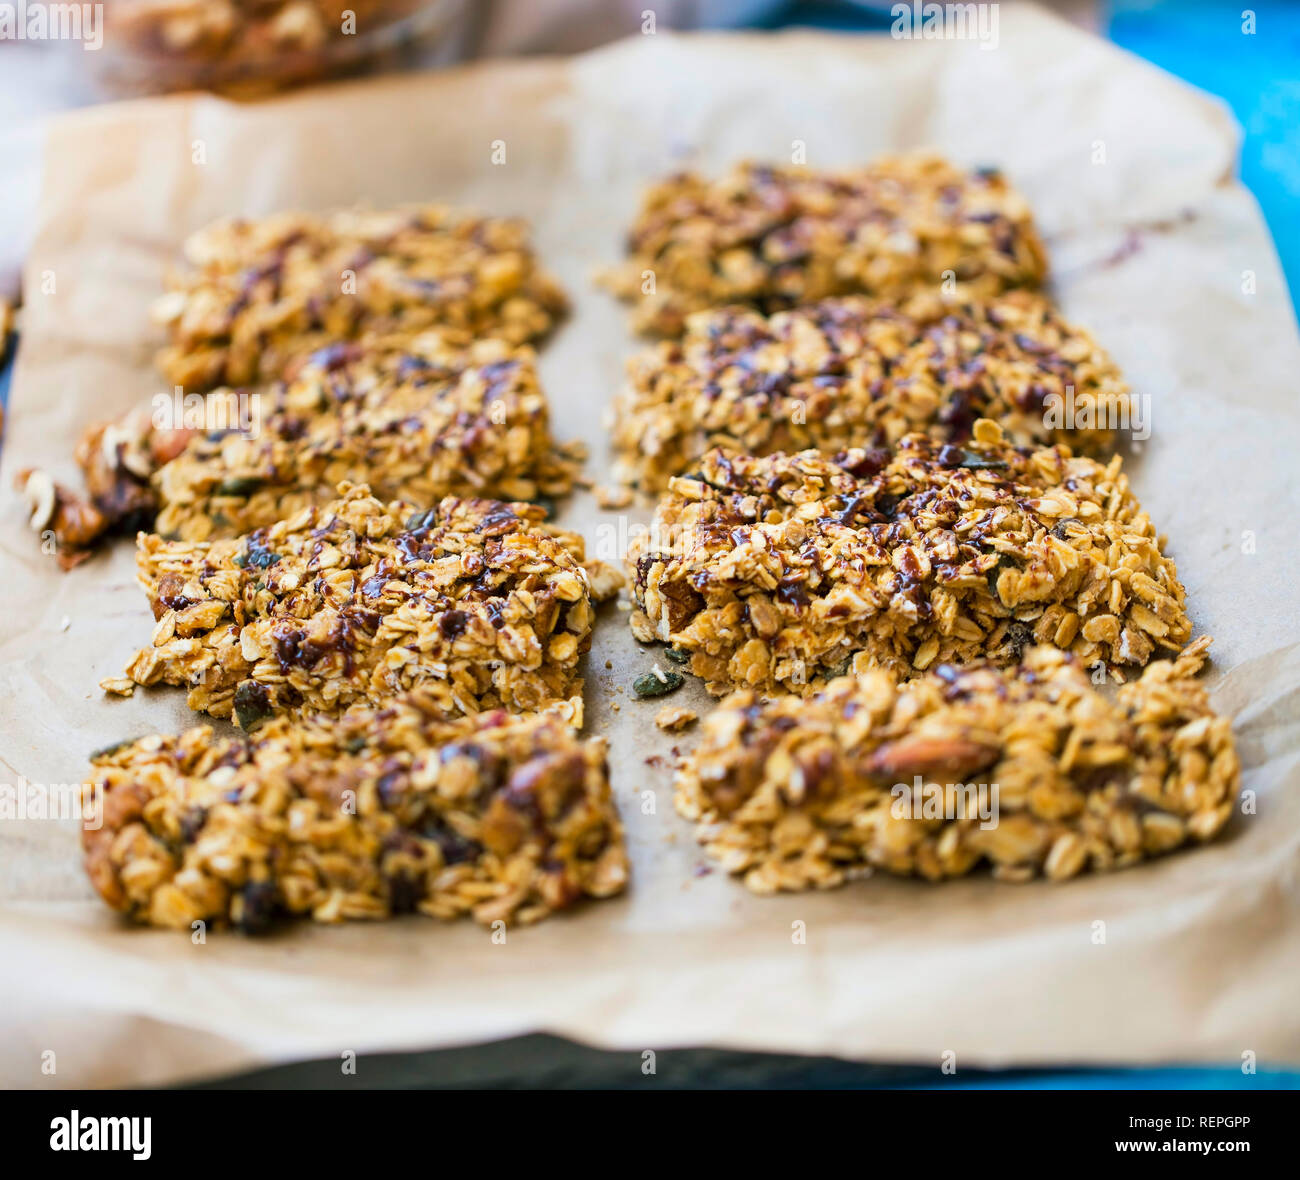 Homemade granola bars with oats, nuts, seeds and chocolate syrup, healthy eating and diet lifestyle food concept Stock Photo